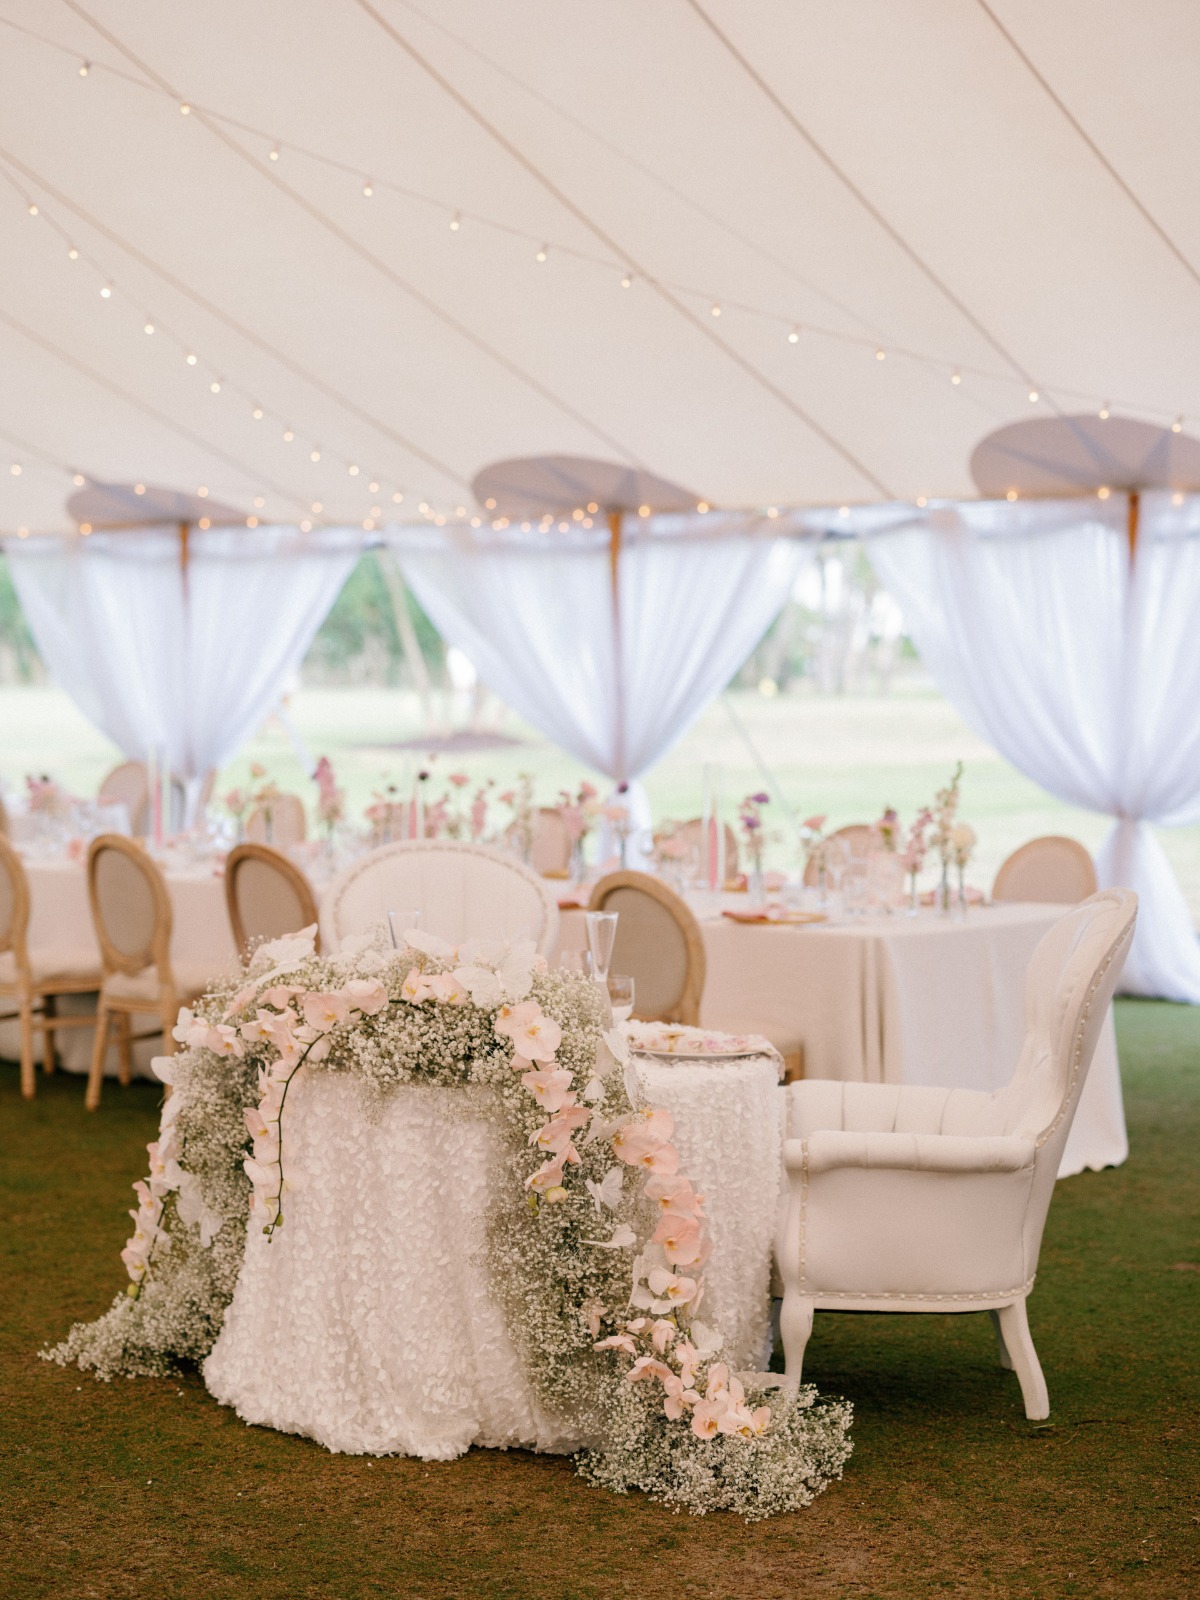 Sweetheart table with draping baby's breath and butterflies